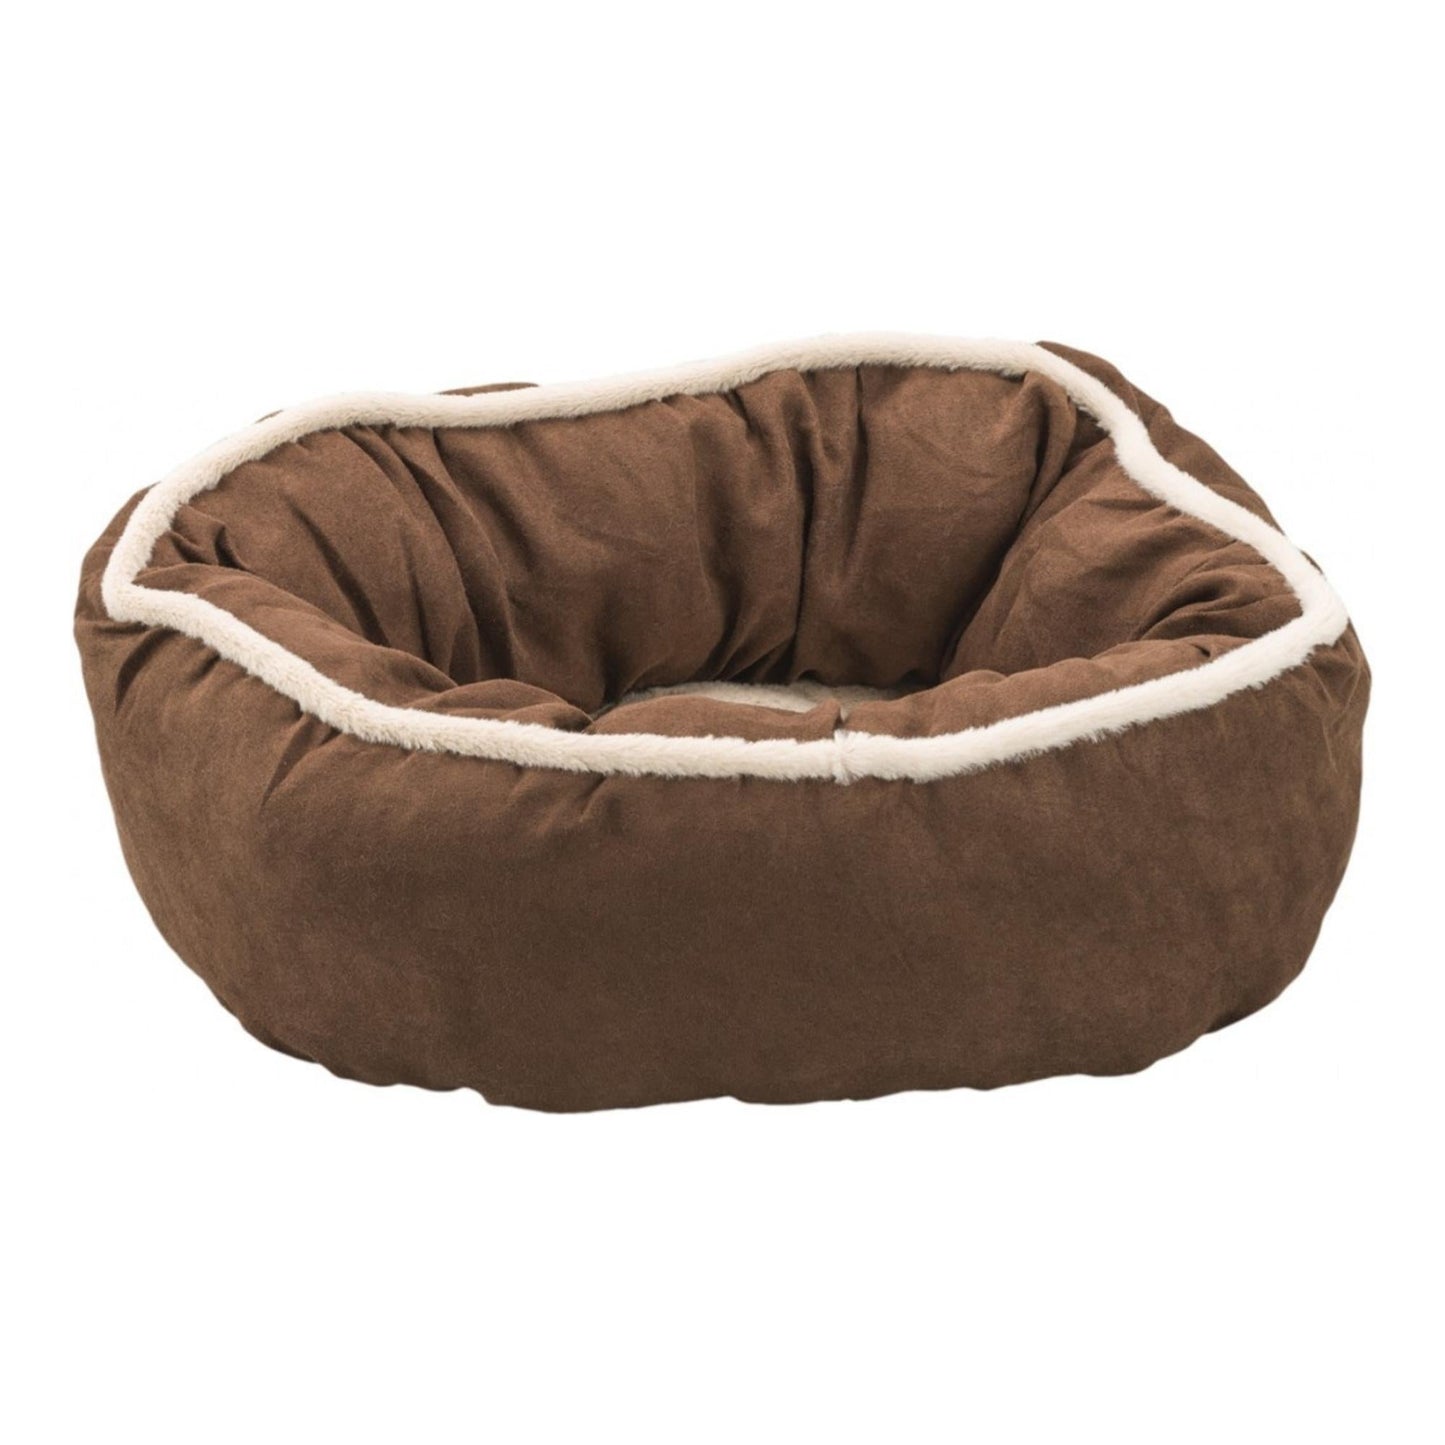 Ethical Pet Sleep Zone Shearling Oval Cuddler 18" Chocolate